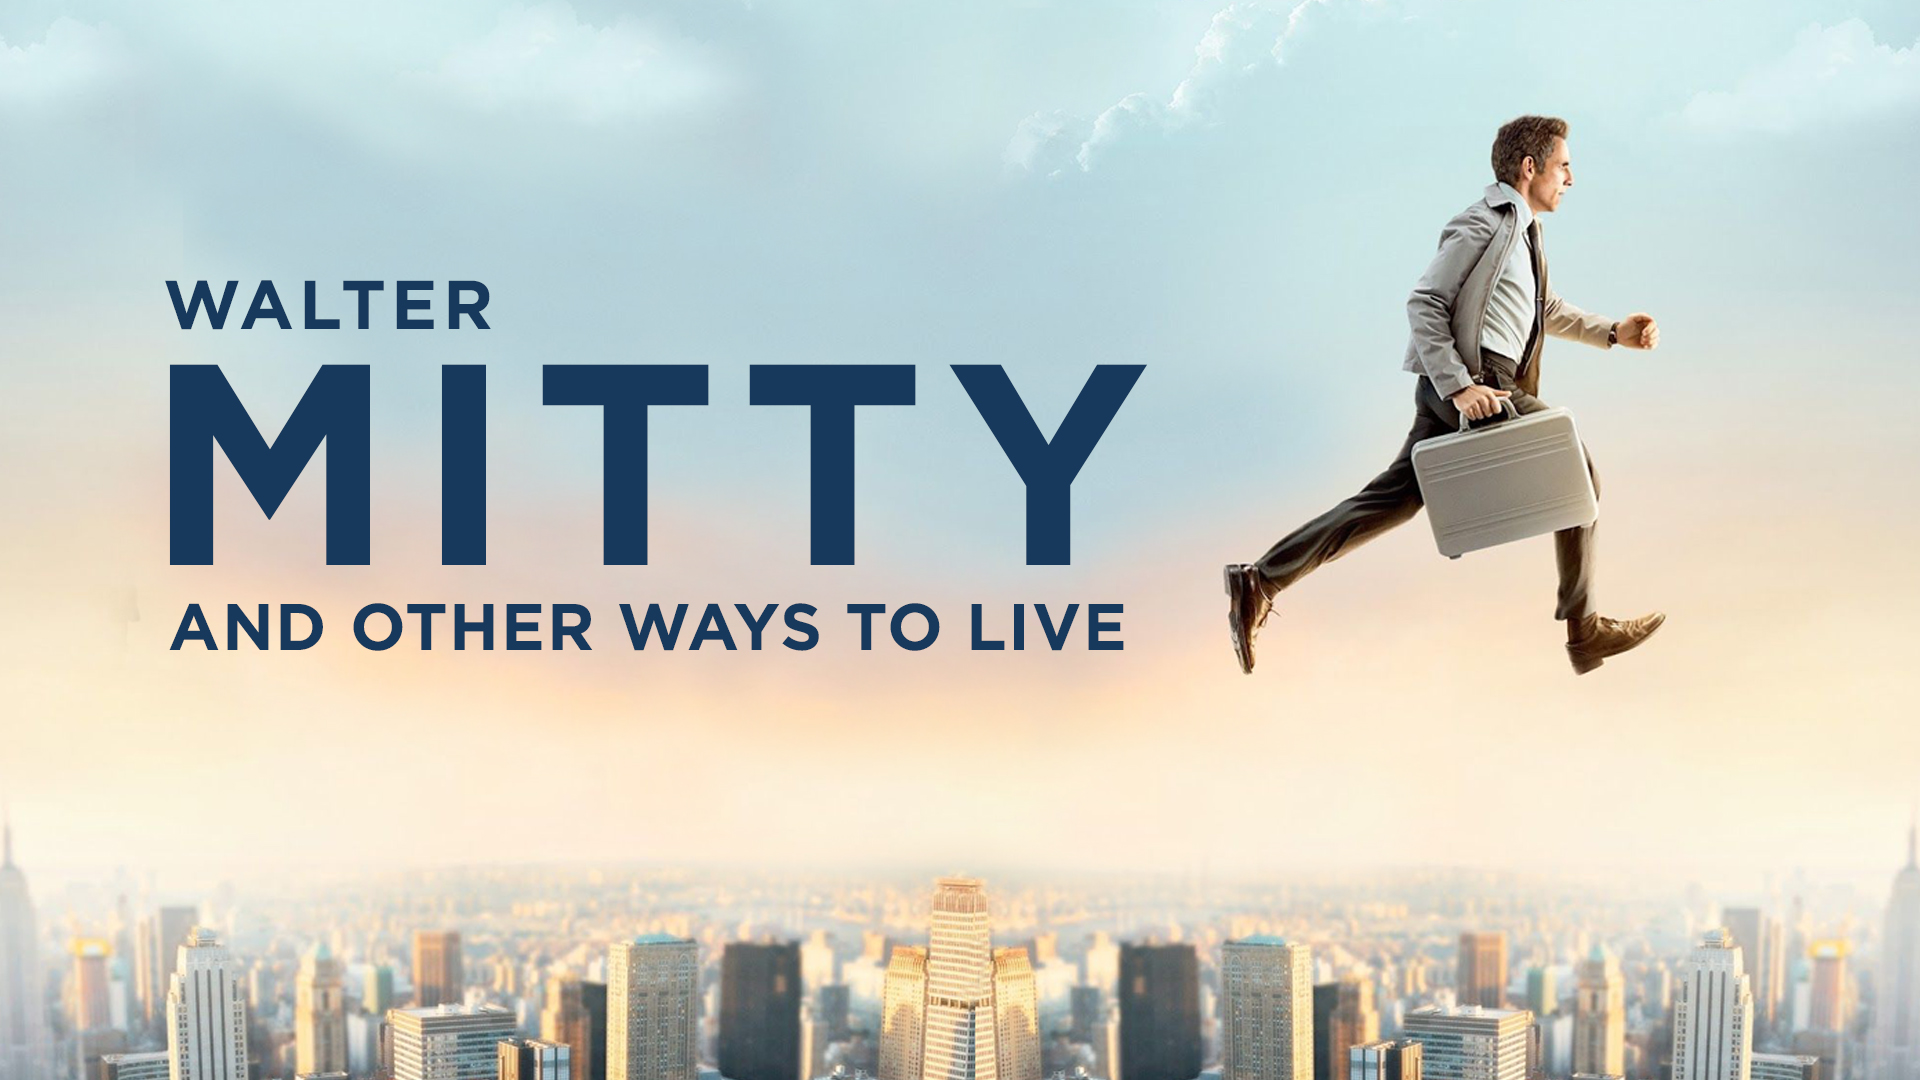  Walter Mitty and Other Ways to Live